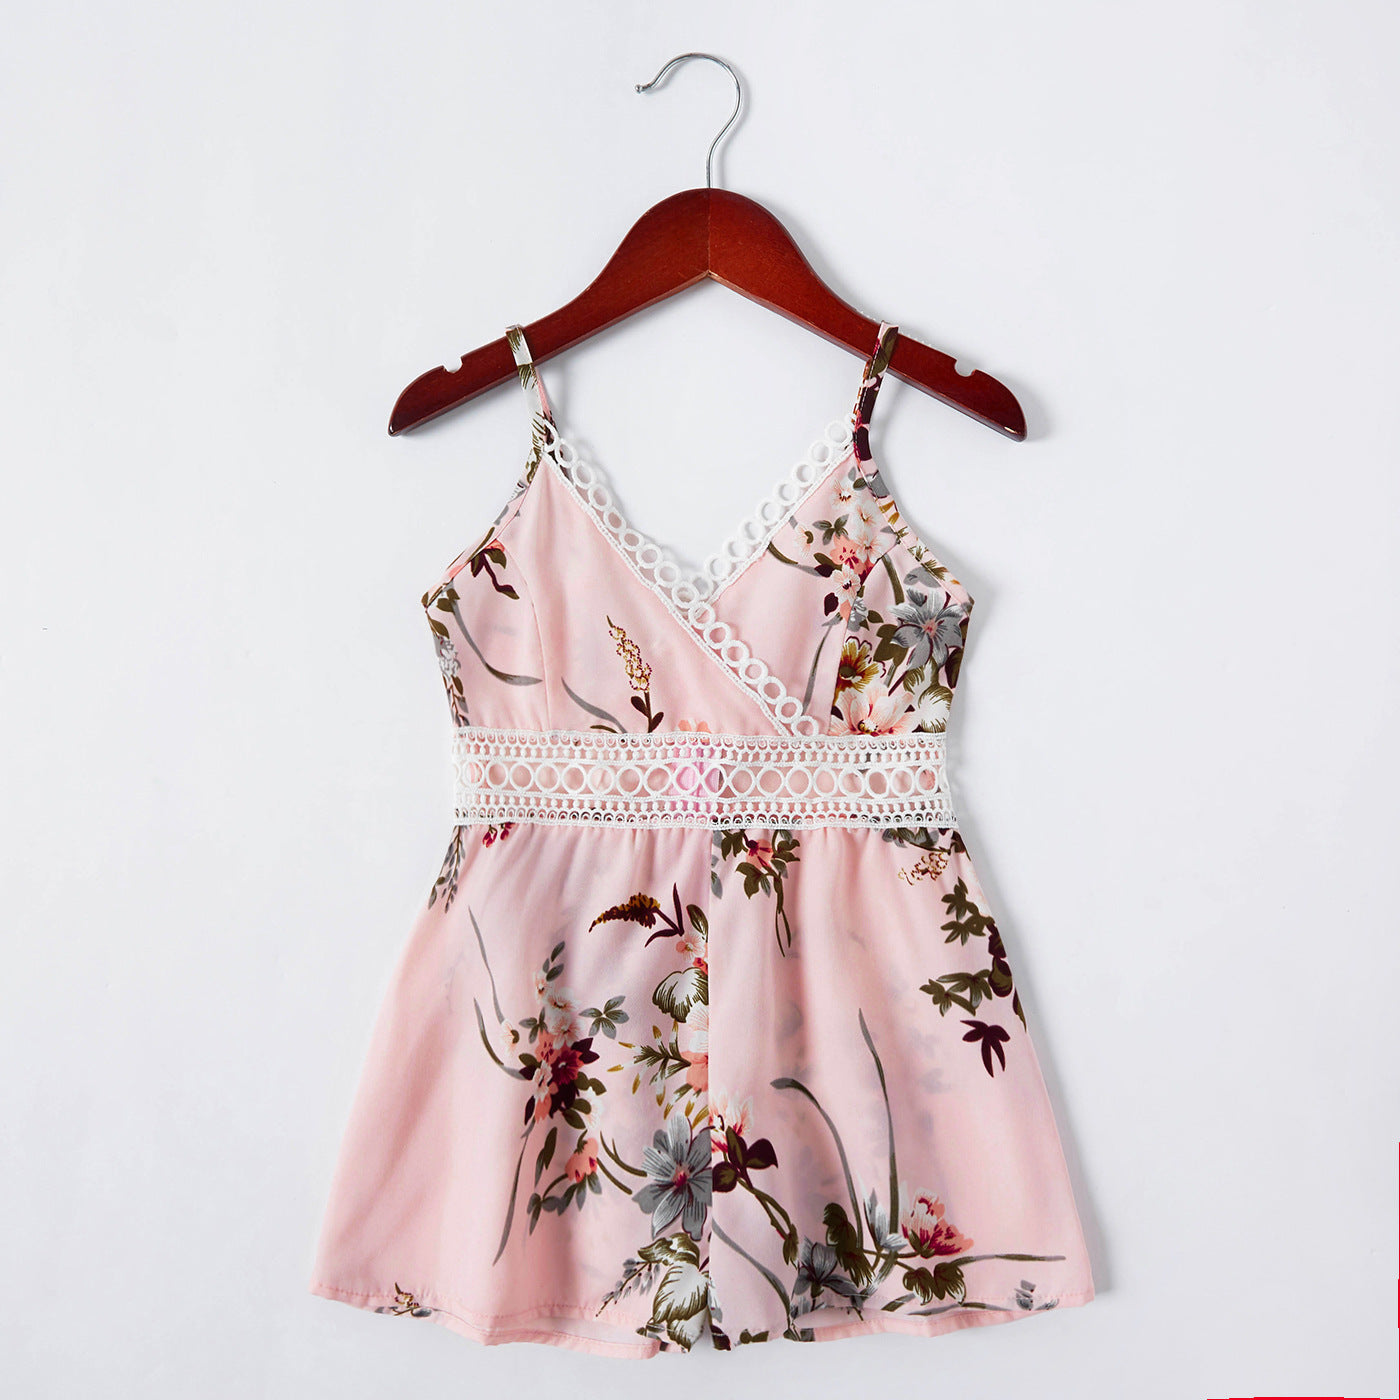 Allover Floral Print Pink Lace V Neck Sleeveless Spaghetti Strap Romper for Mom and Me